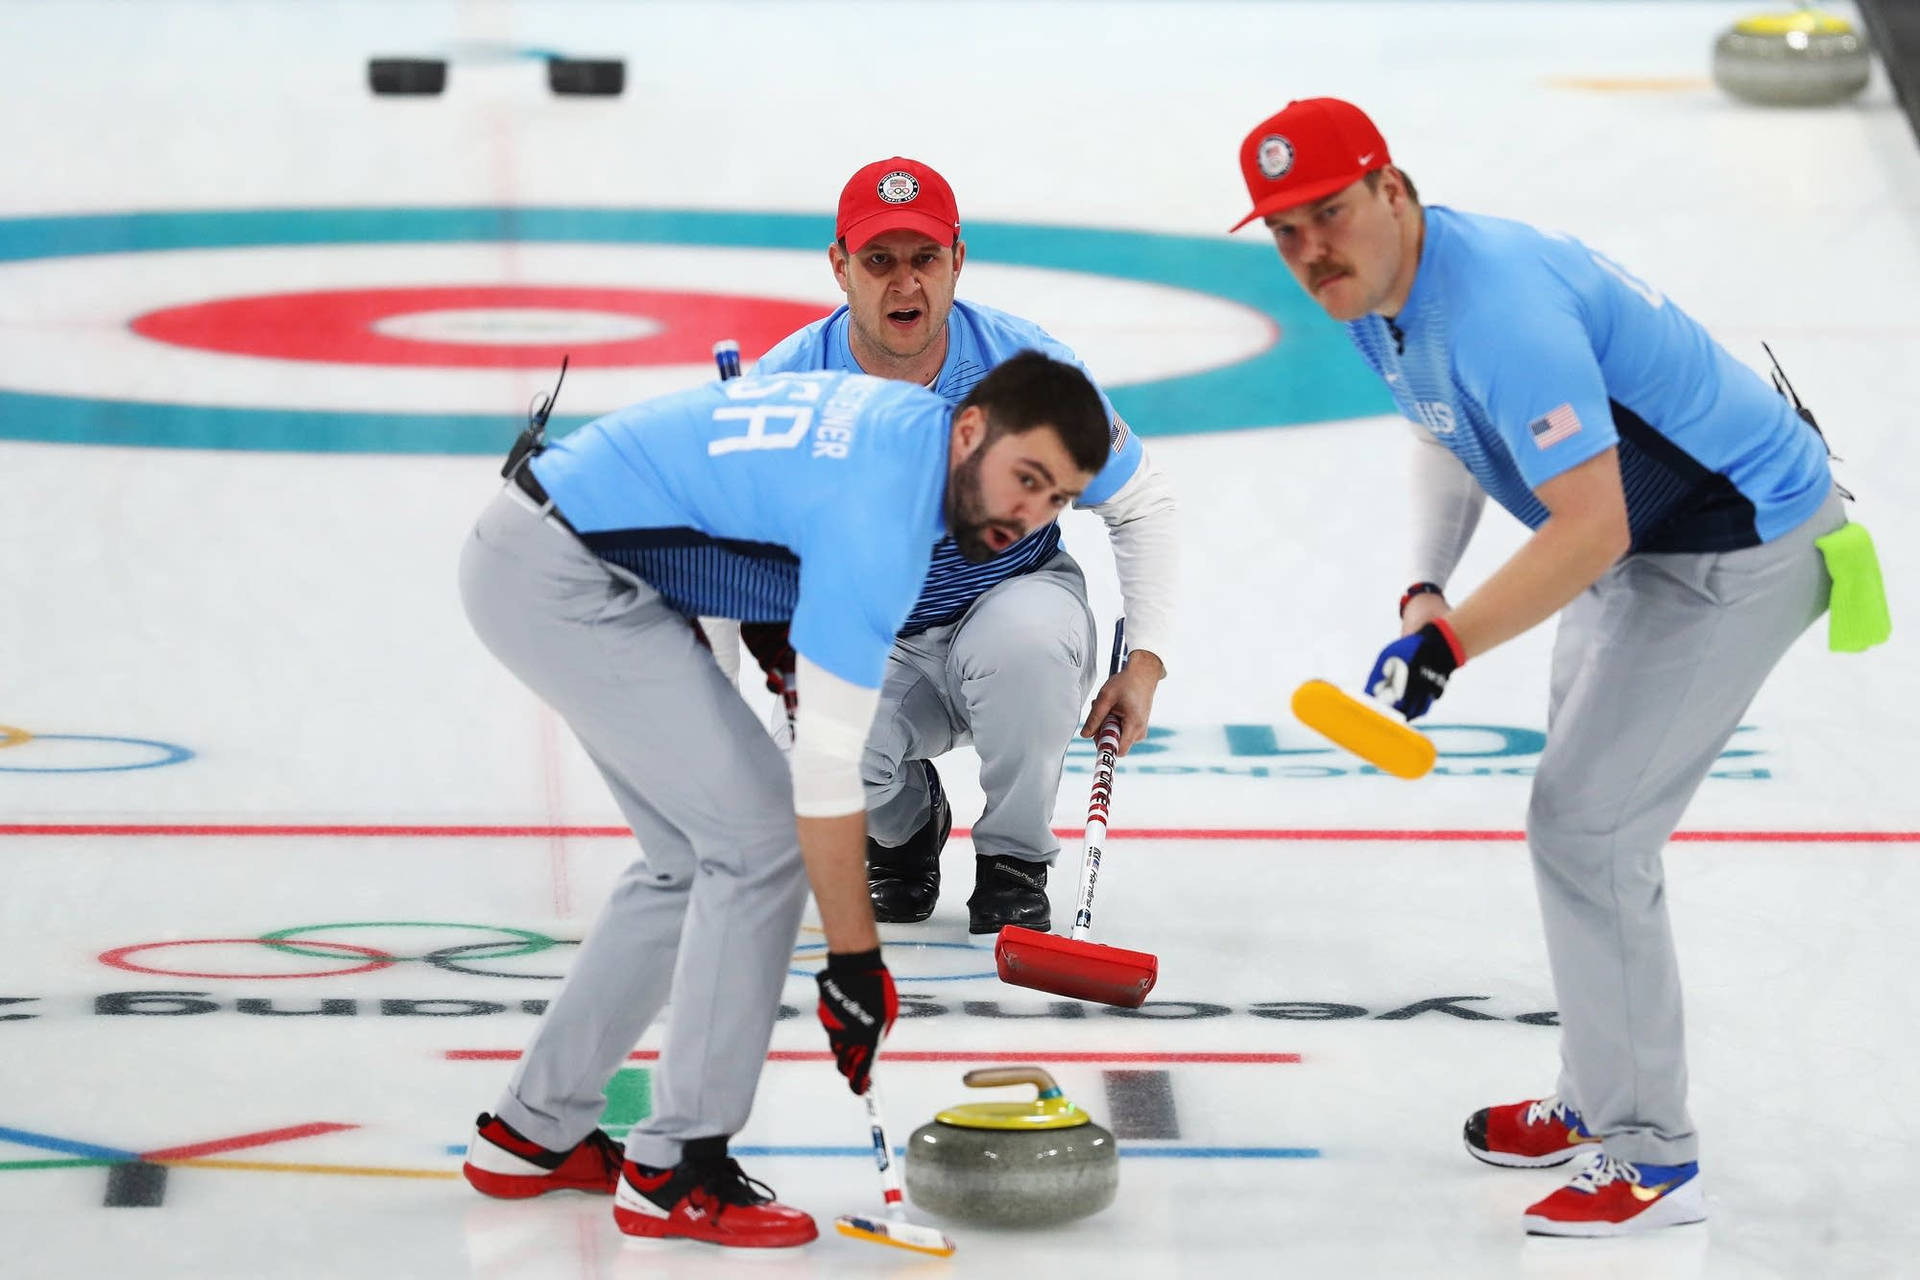 Athletes Curling The Stone On The Ice Wallpaper